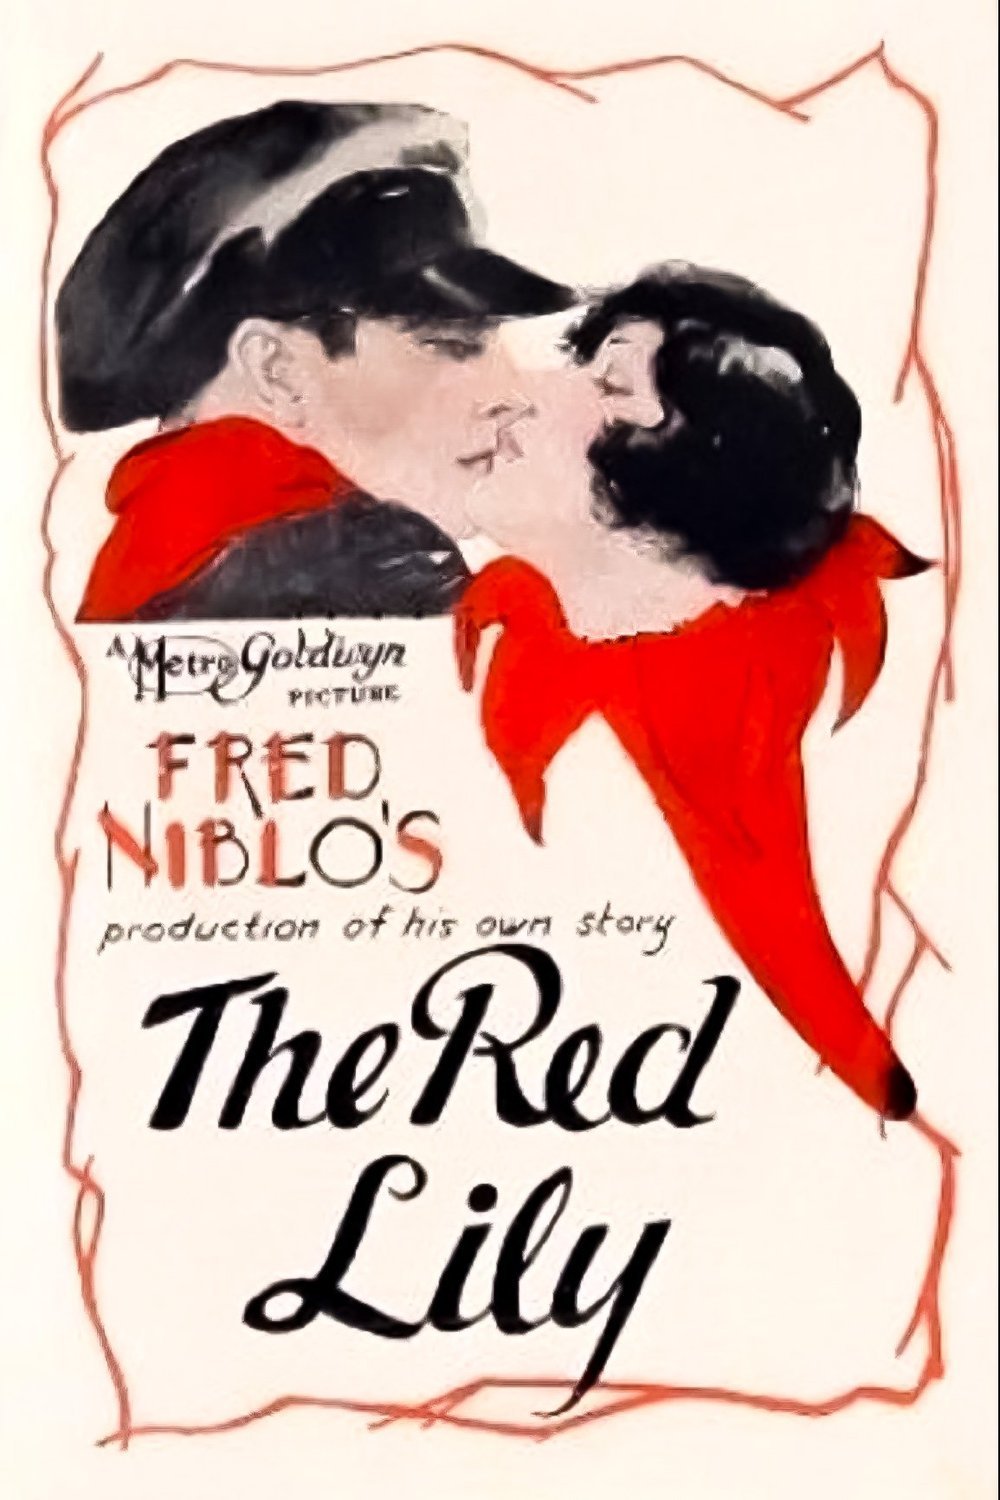 L'affiche du film The Red Lily